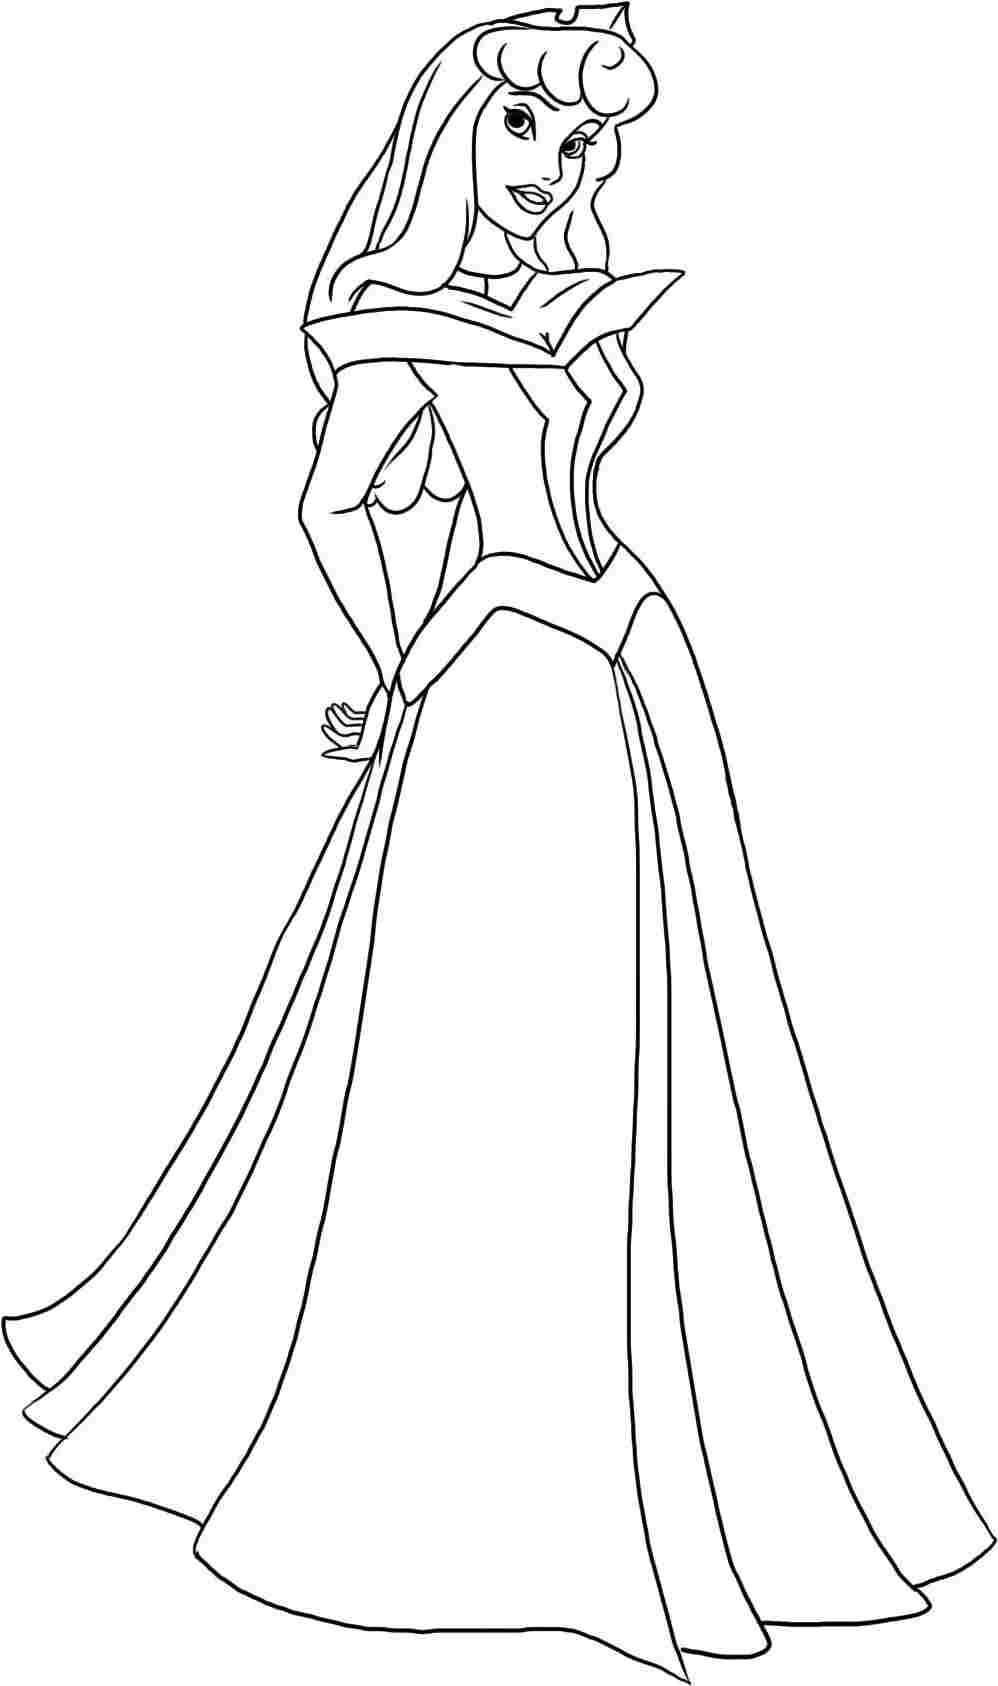 Printable Coloring Pages Of Aurora - Coloring Home